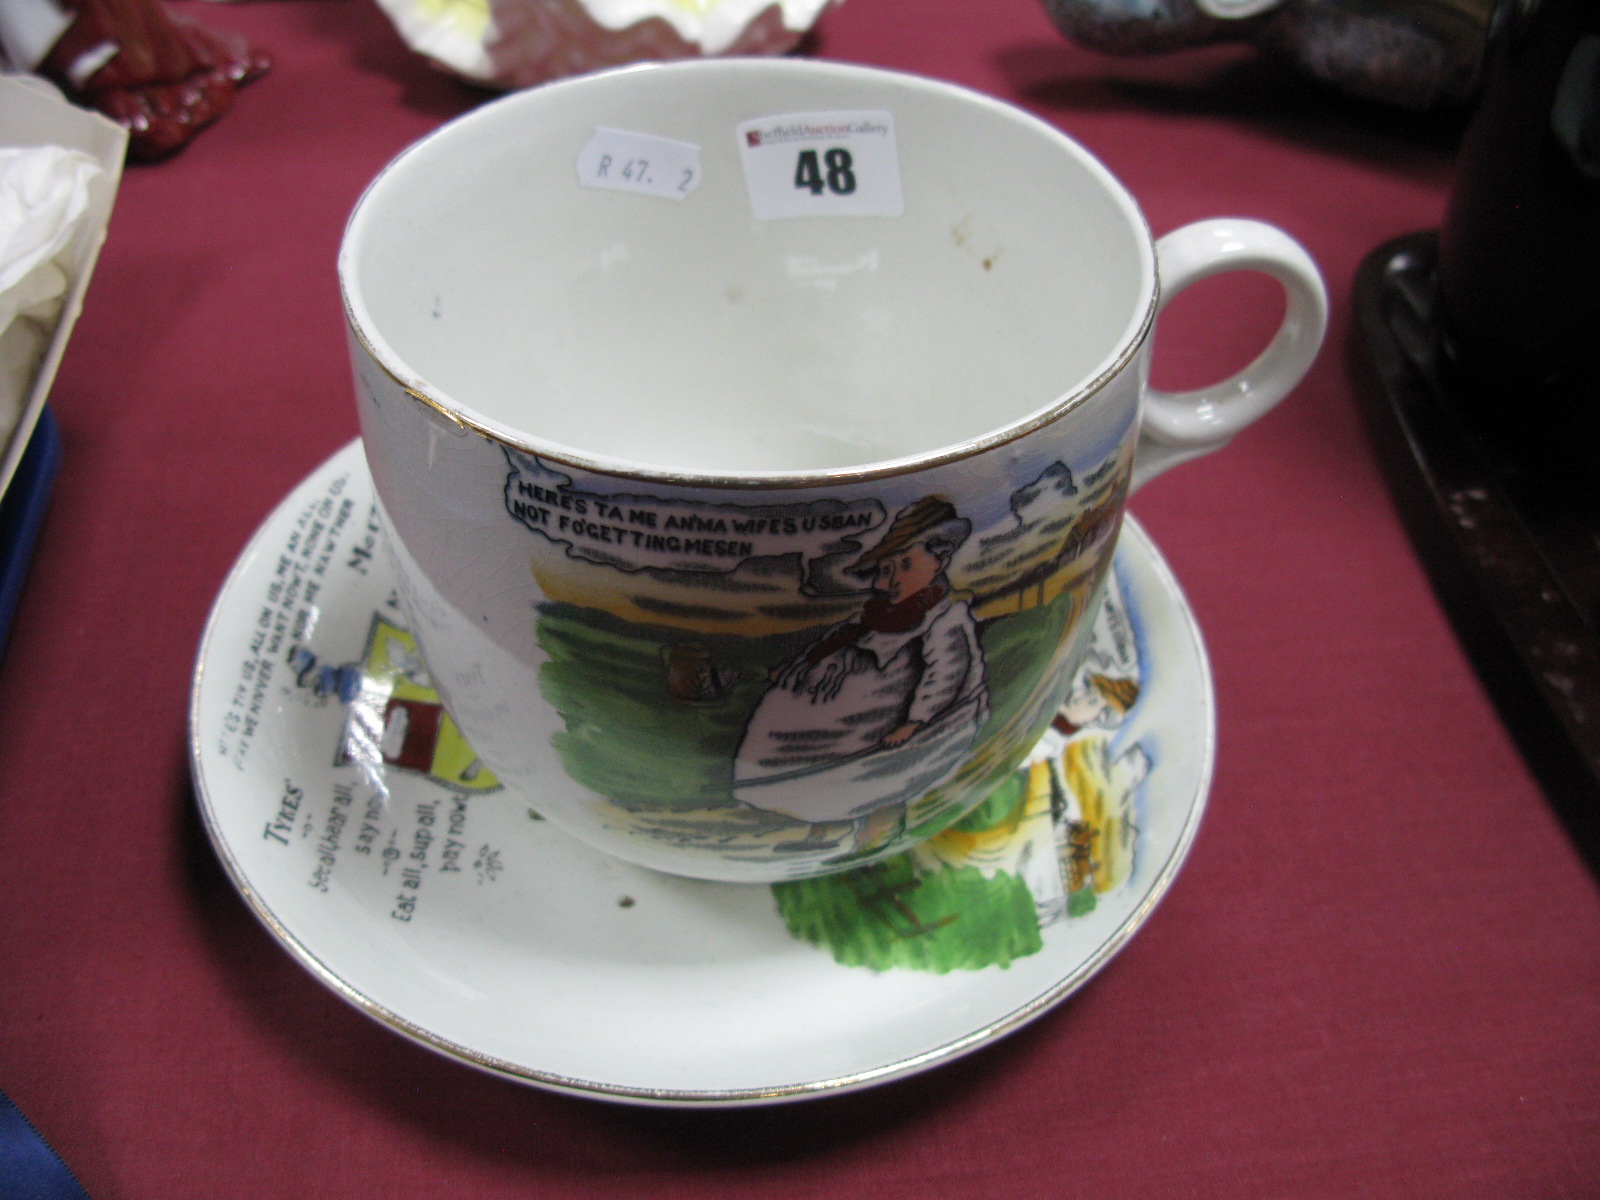 A Large Early 1900's Tykes Motto Teacup and Saucer, stamped 'Trade Mark Tyke B&K Ltd' to bases.